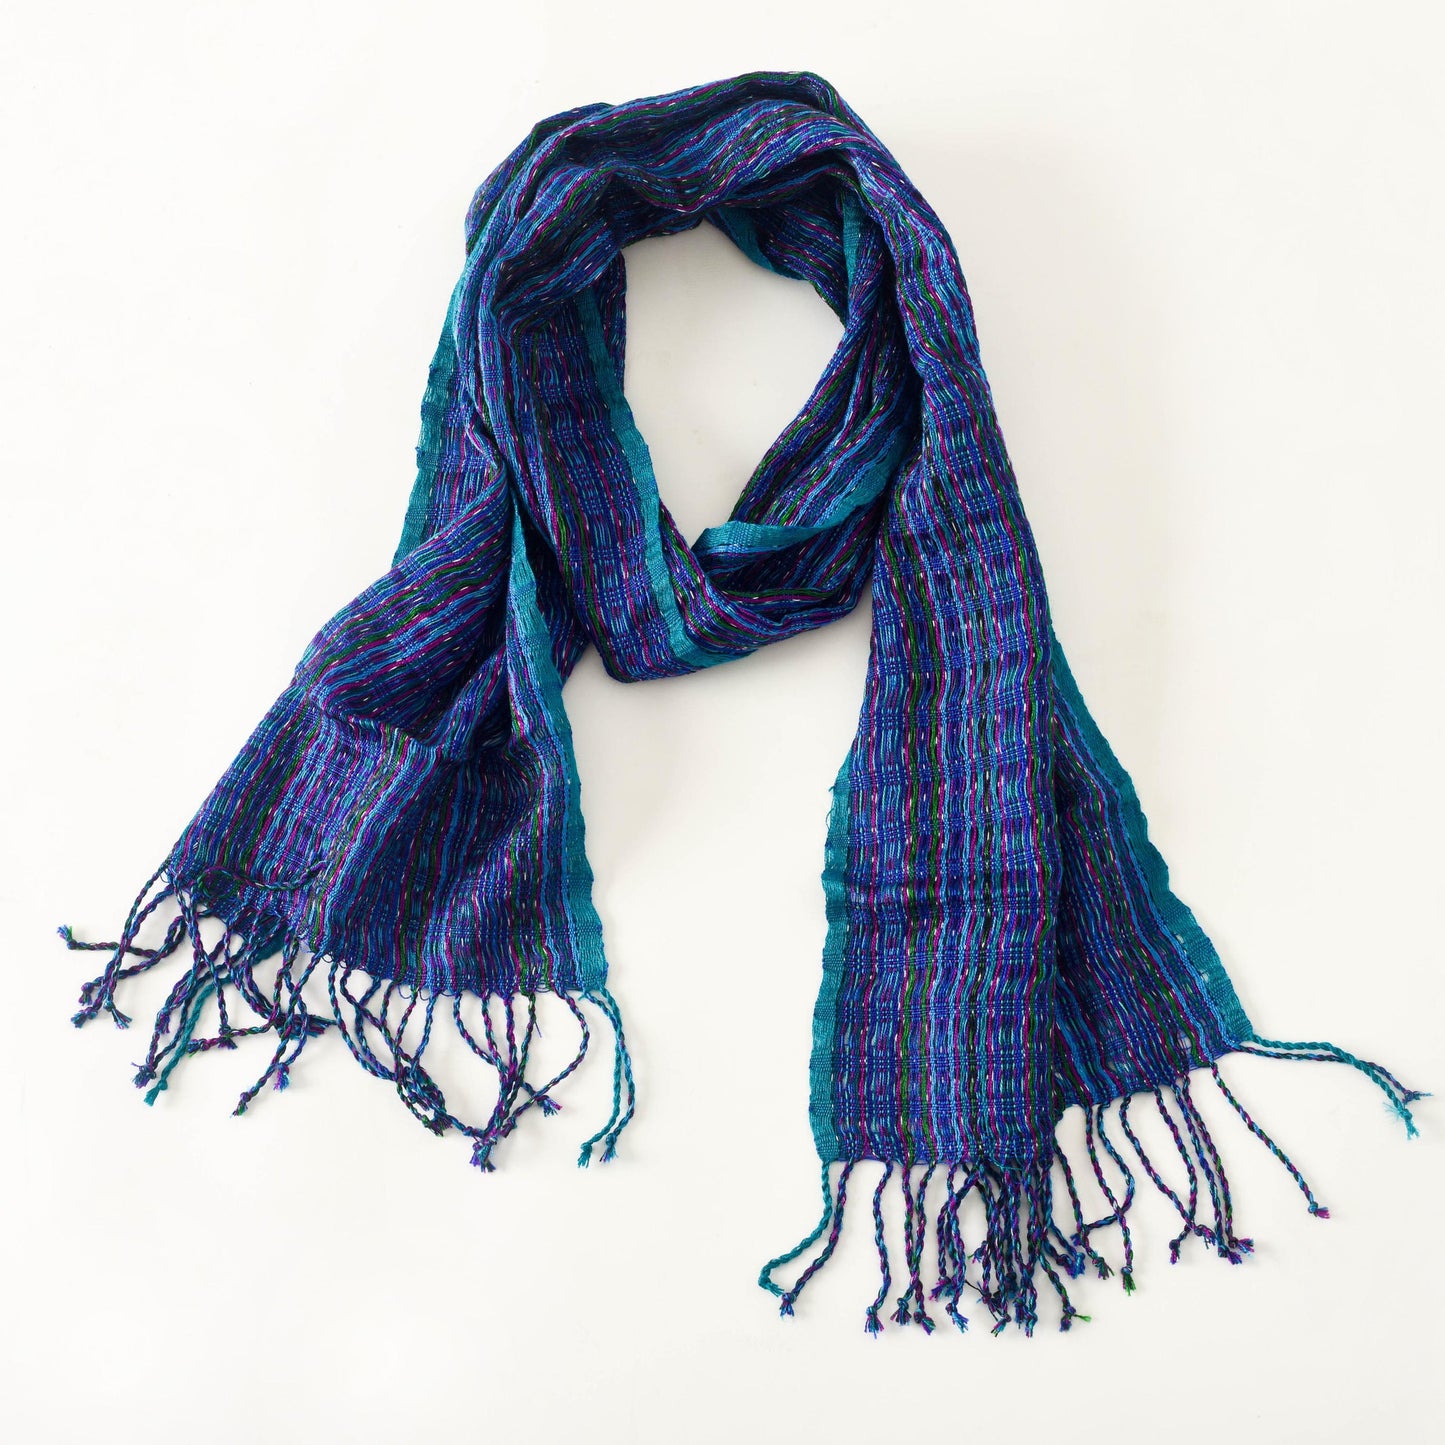 Ethical Fashion, Handwoven Scarf "South Seas"